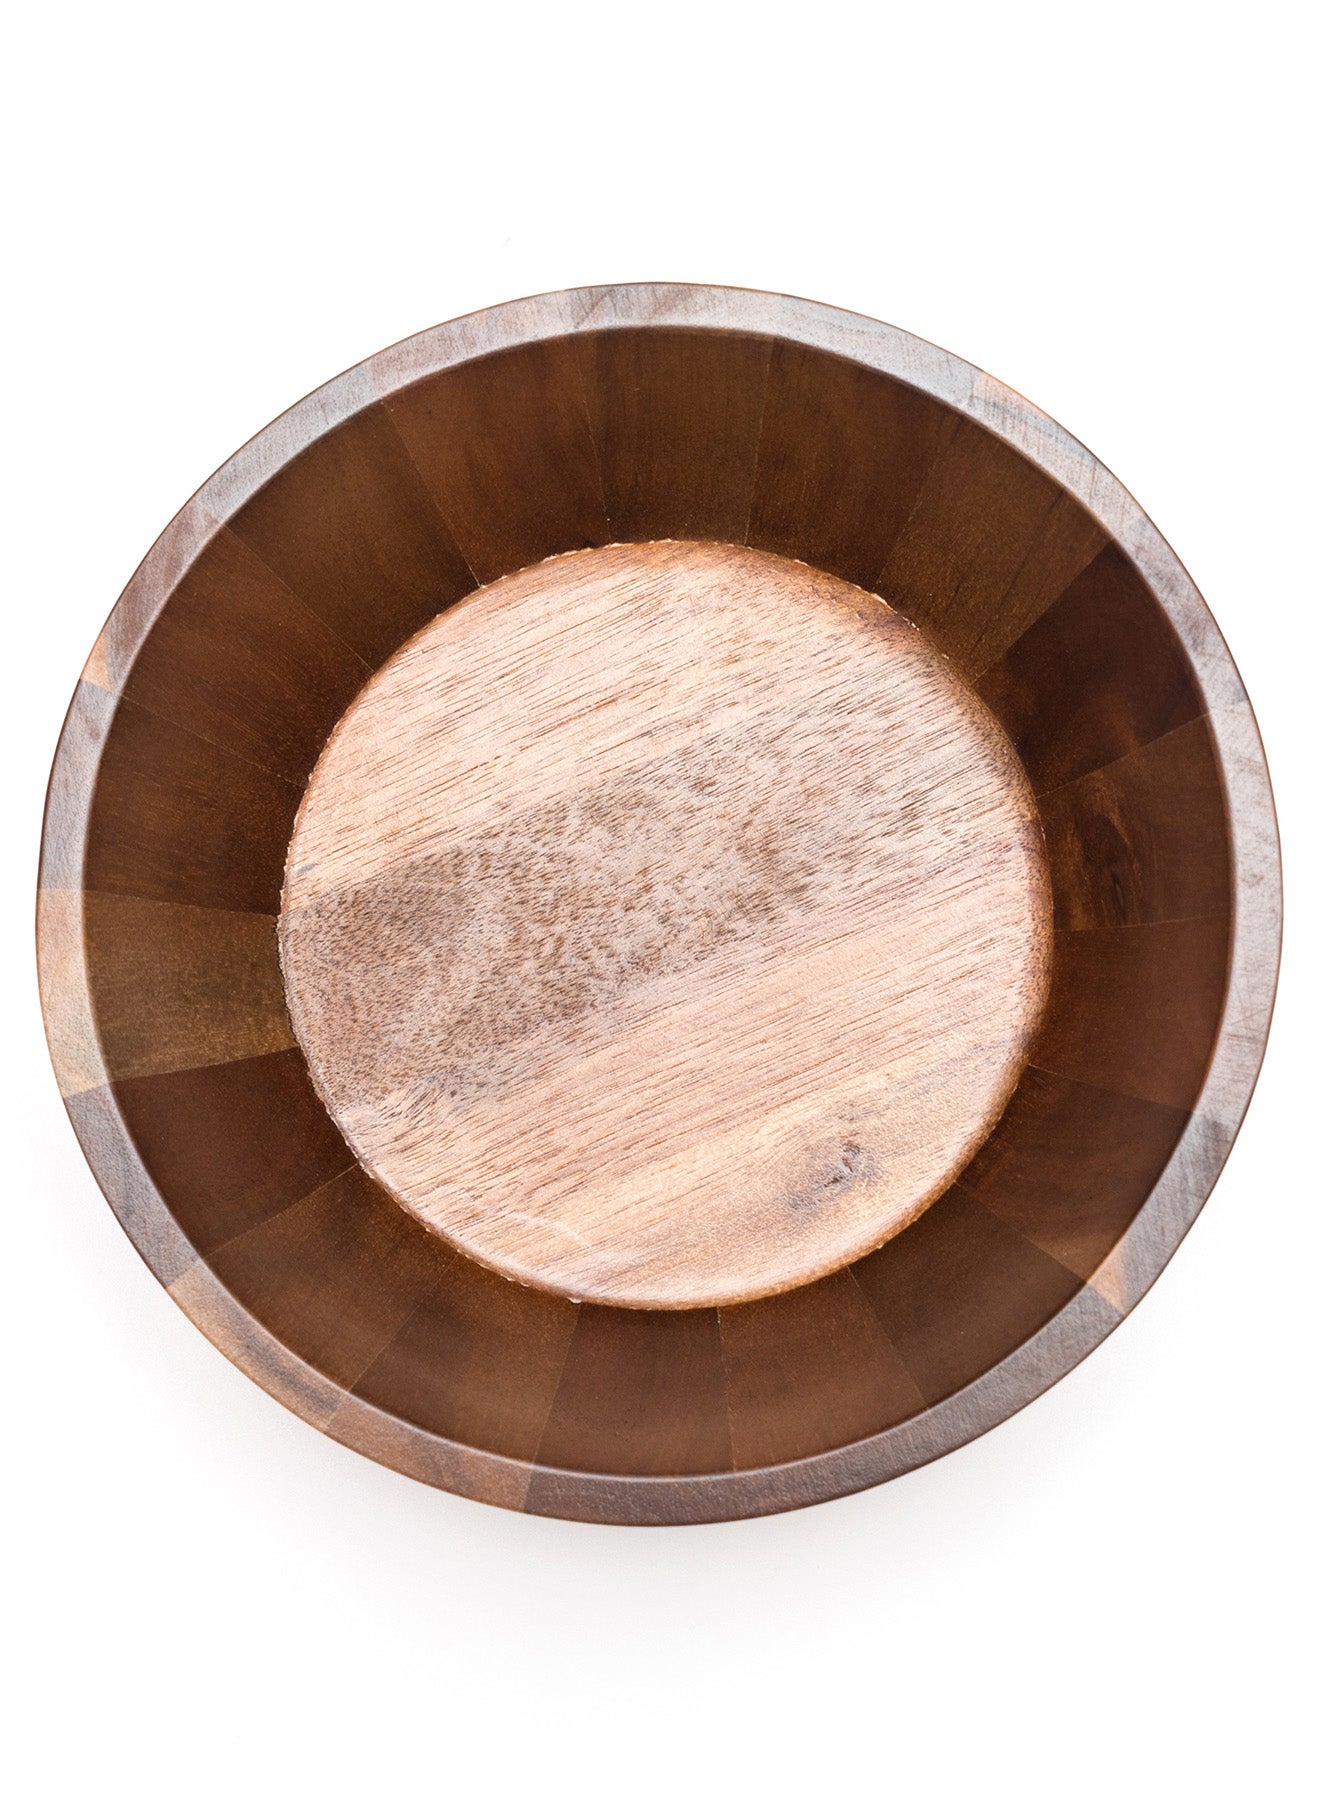 Salad Bowl - Made Of Acacia Wood - Premium Quality - Wooden Bowl - Serving Dishes - By Noon East - Dark Brown 